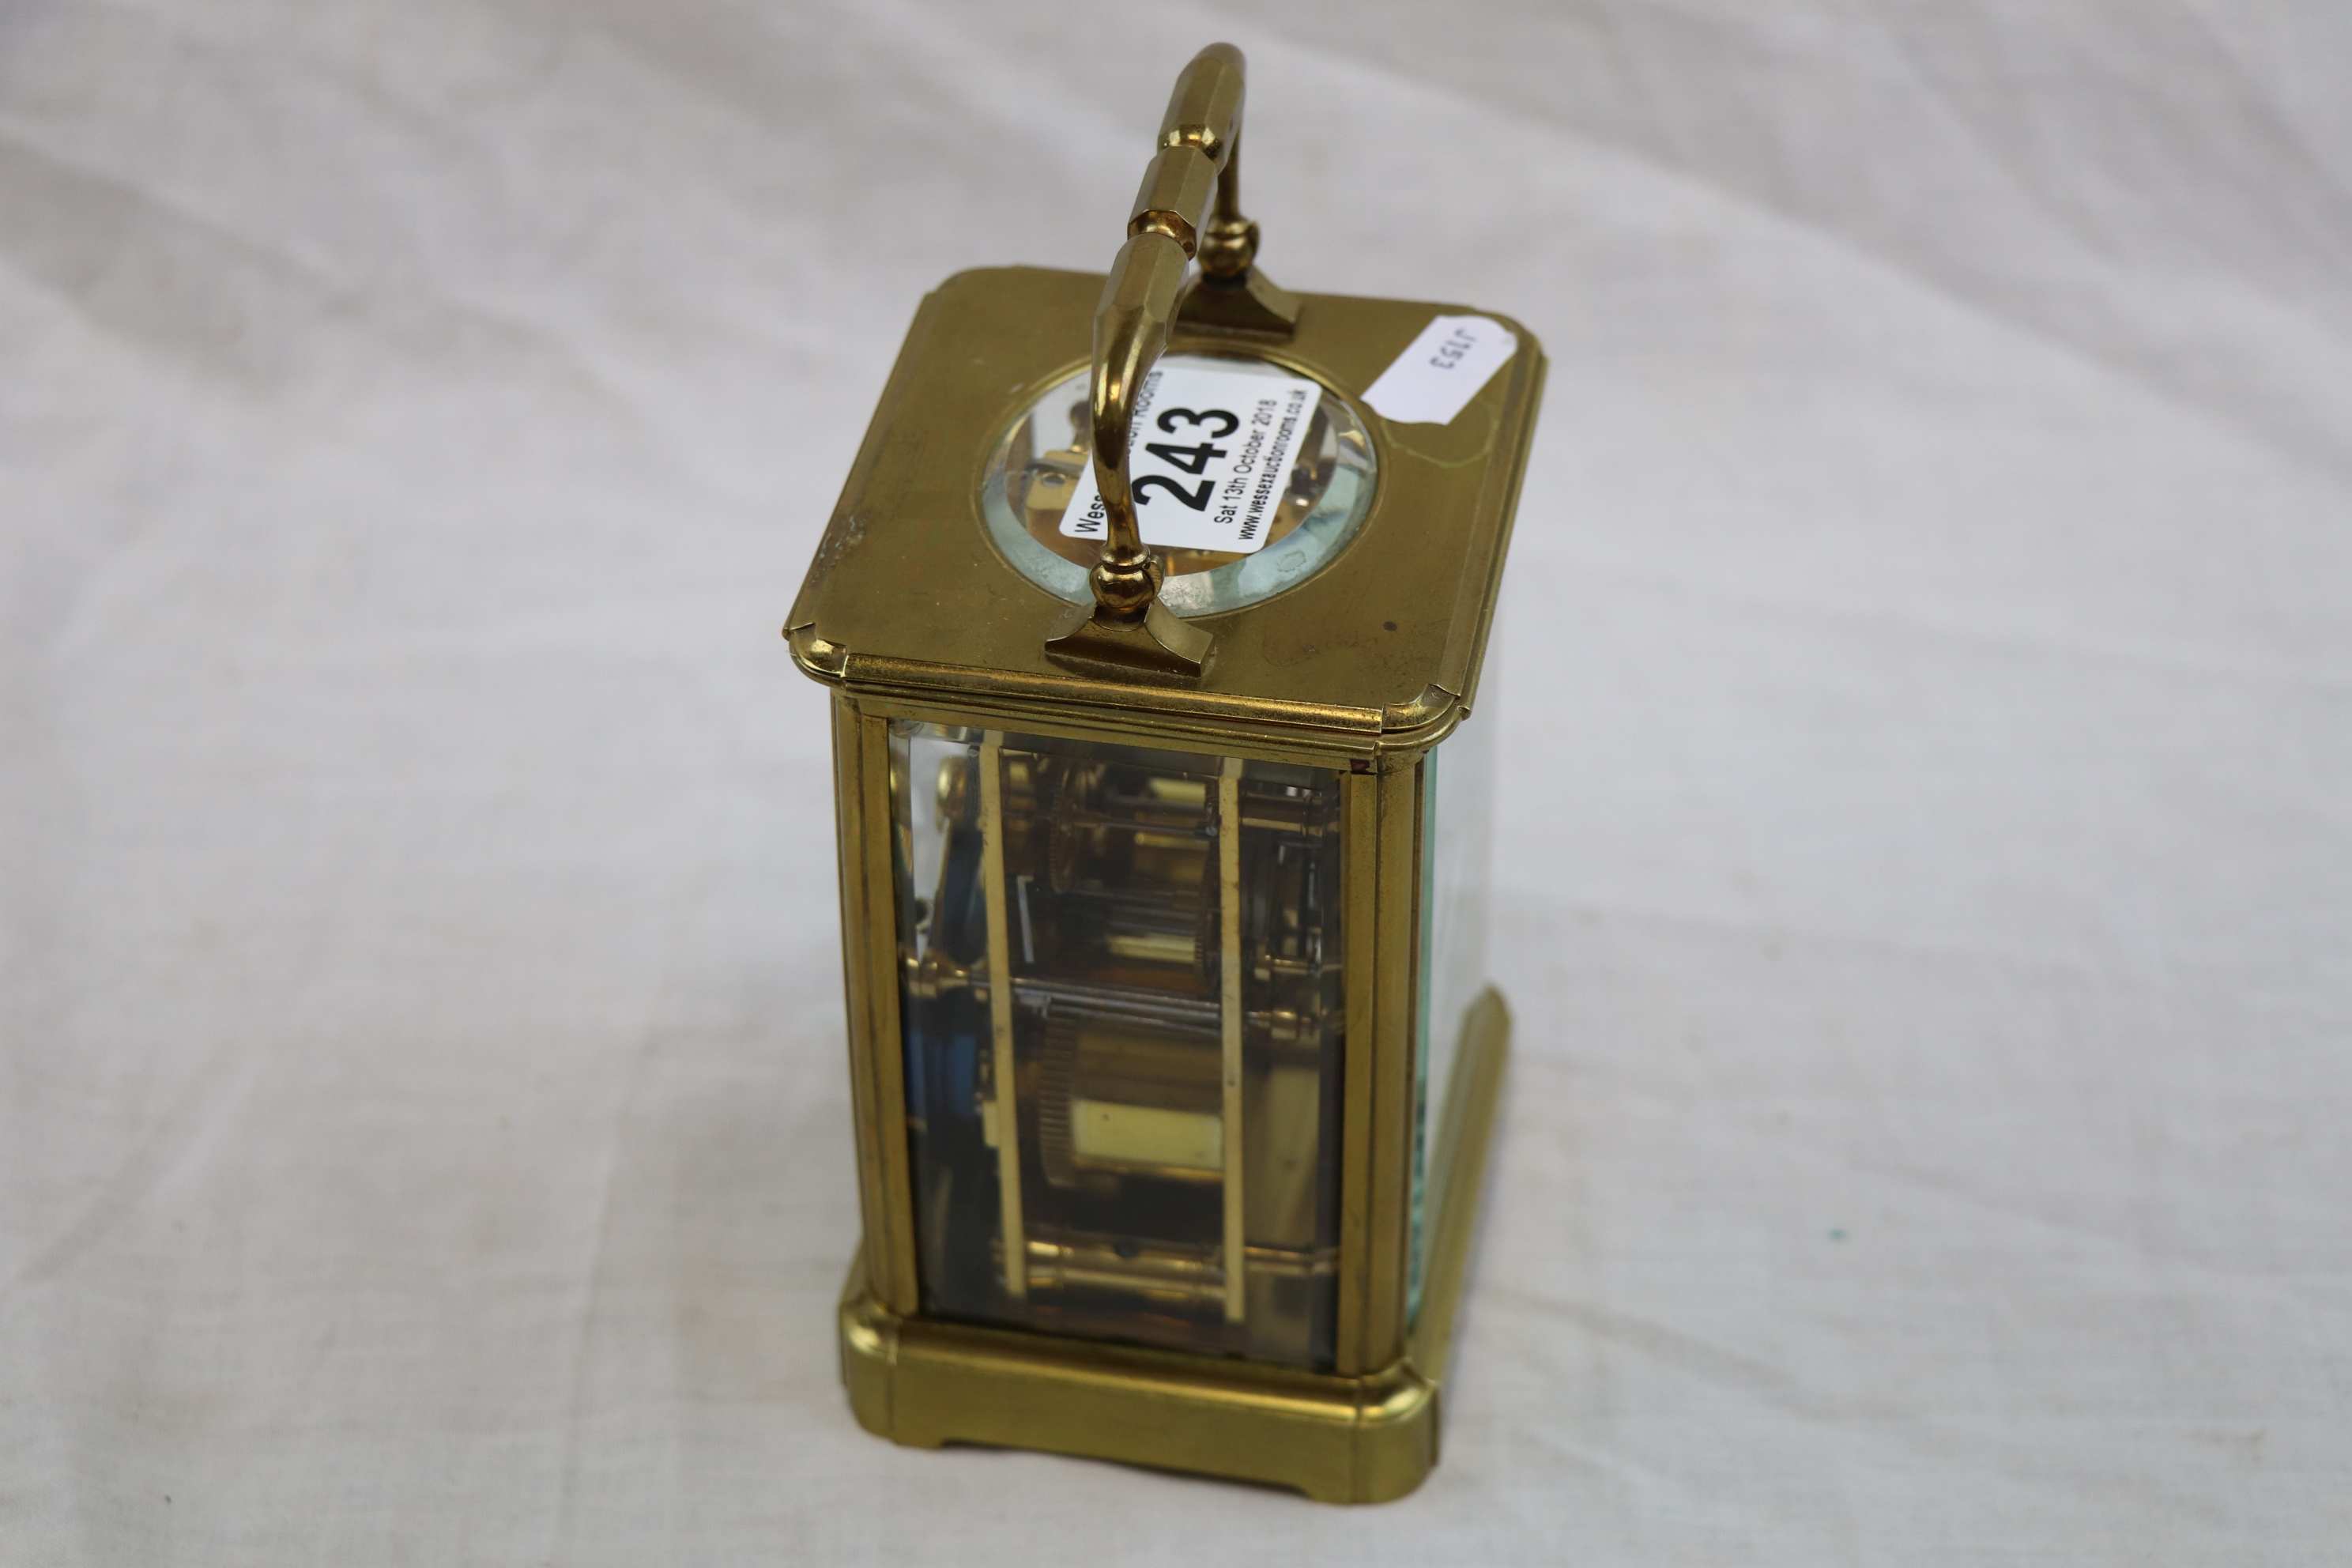 Brass chiming carriage clock, white enamel dial with black Roman numerals with Arabic numerals to - Image 5 of 6